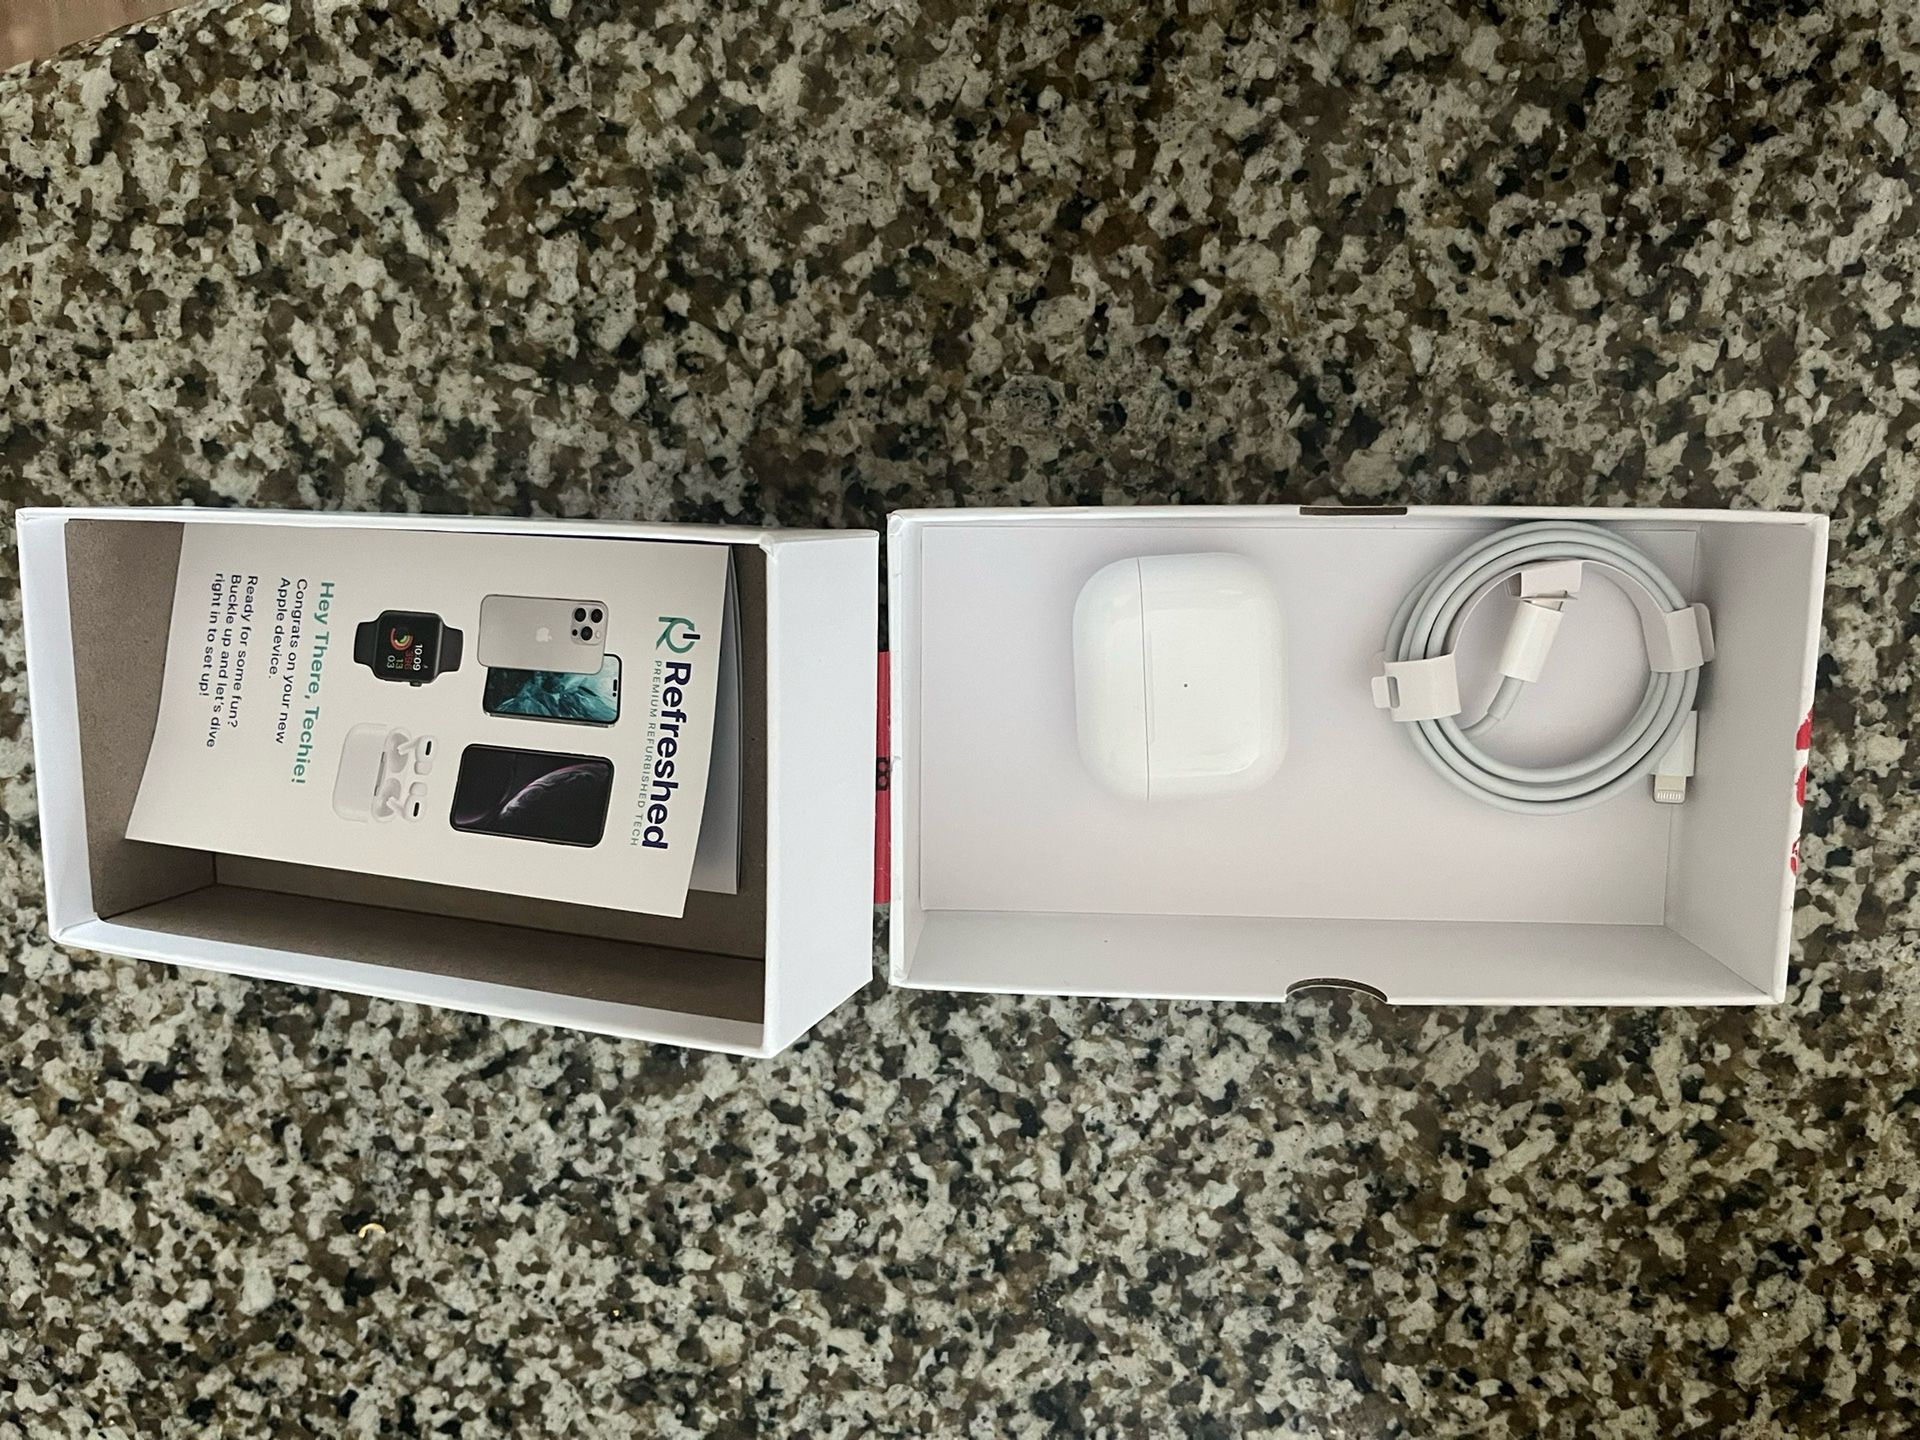 Apple AirPods with Lightning Charging Case (3rd Generation) (Renewed)